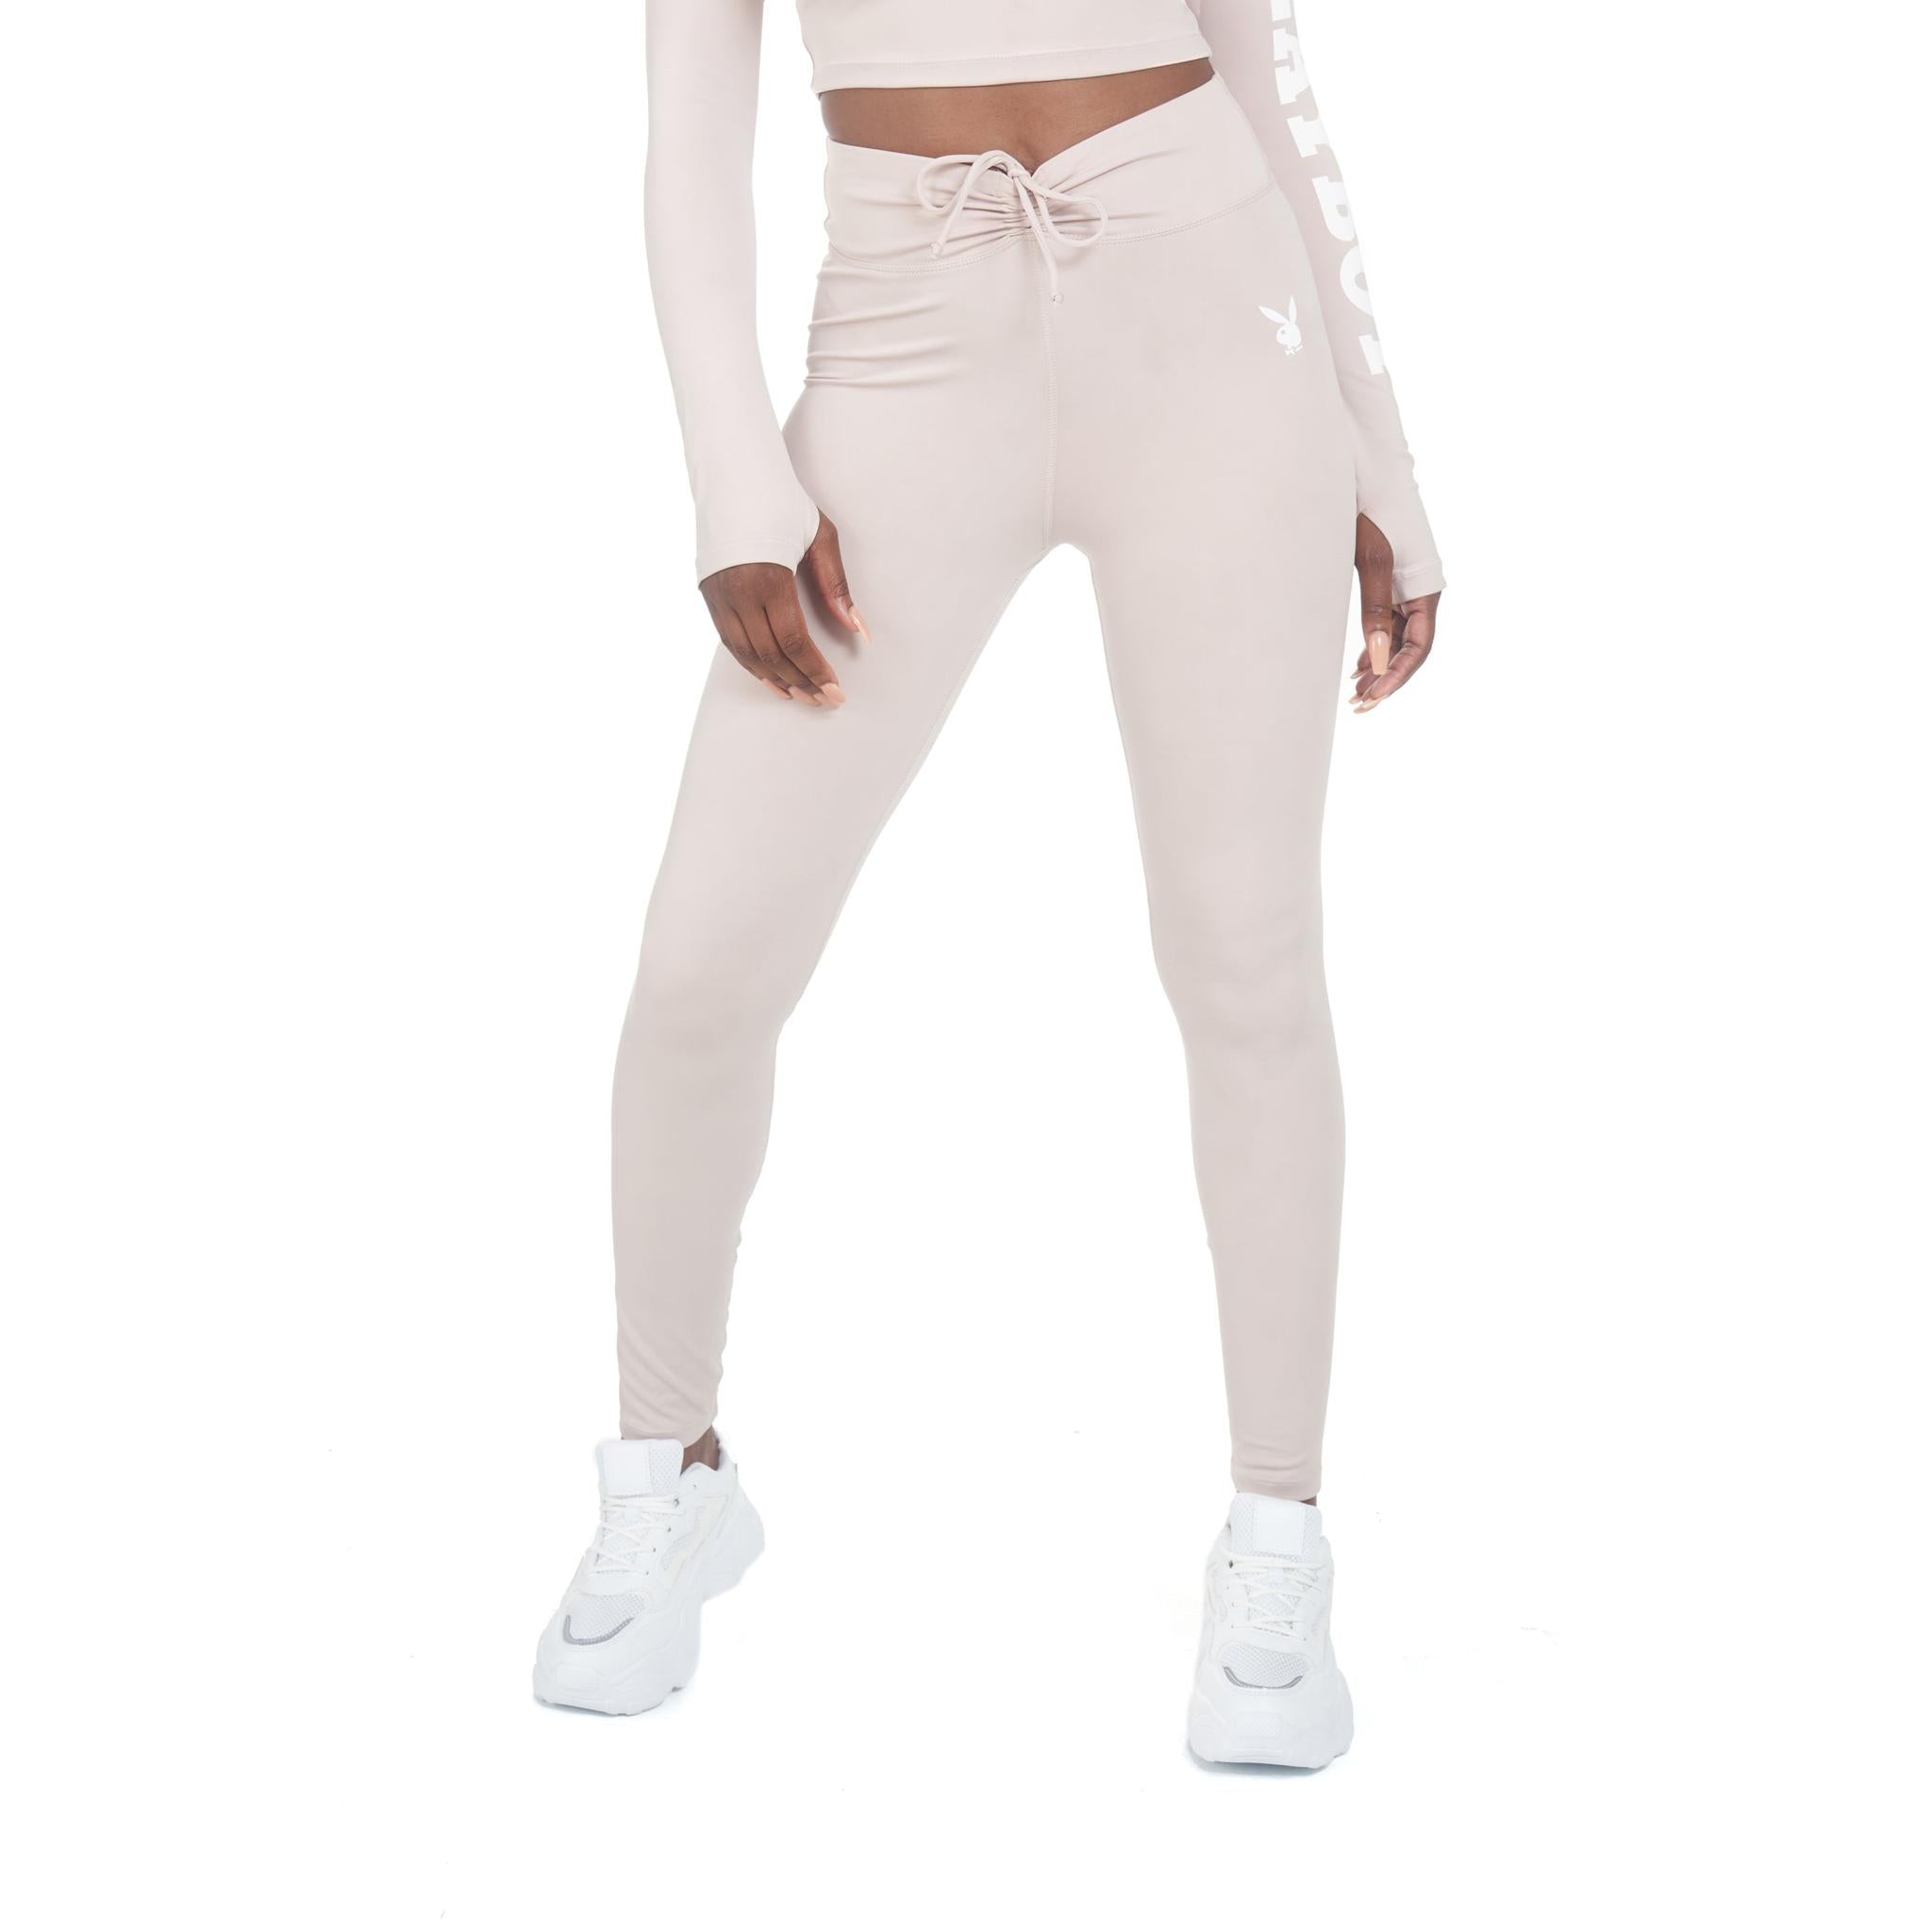 Women's Active Ruched Waistband Leggings